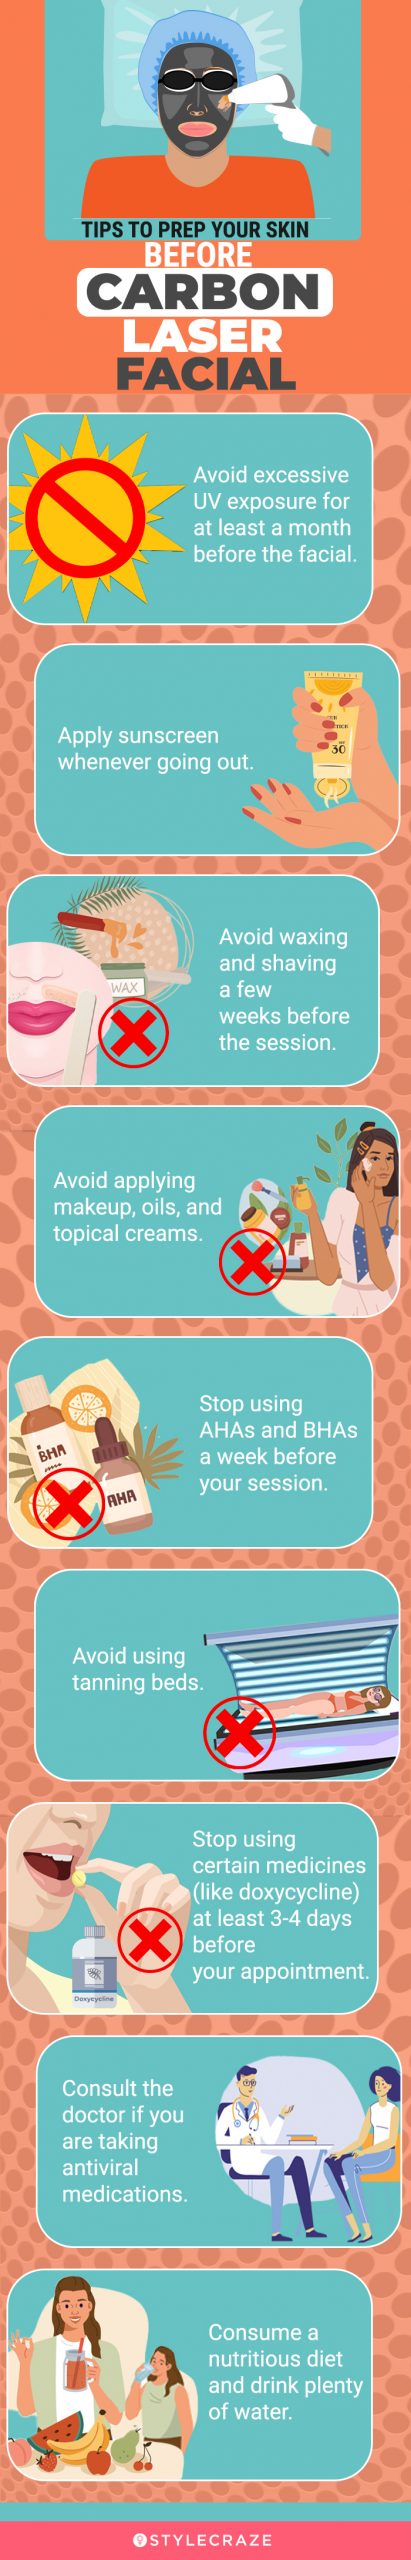 tips to prep your skin before carbon laser facial [infographic]